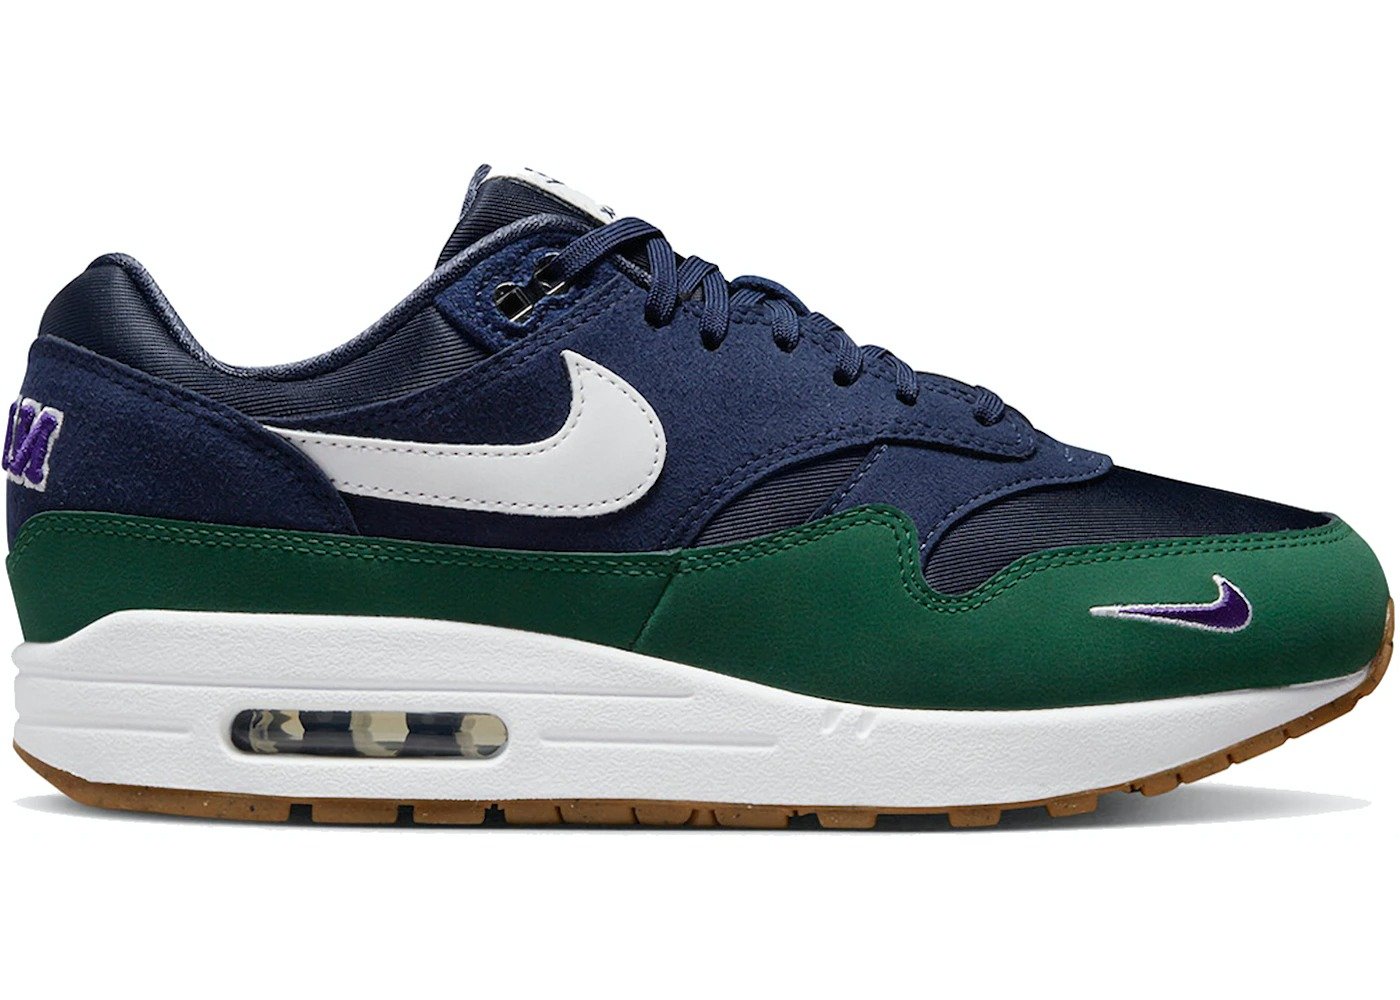 Now Available: Nike Air Max 1 QS (W) 